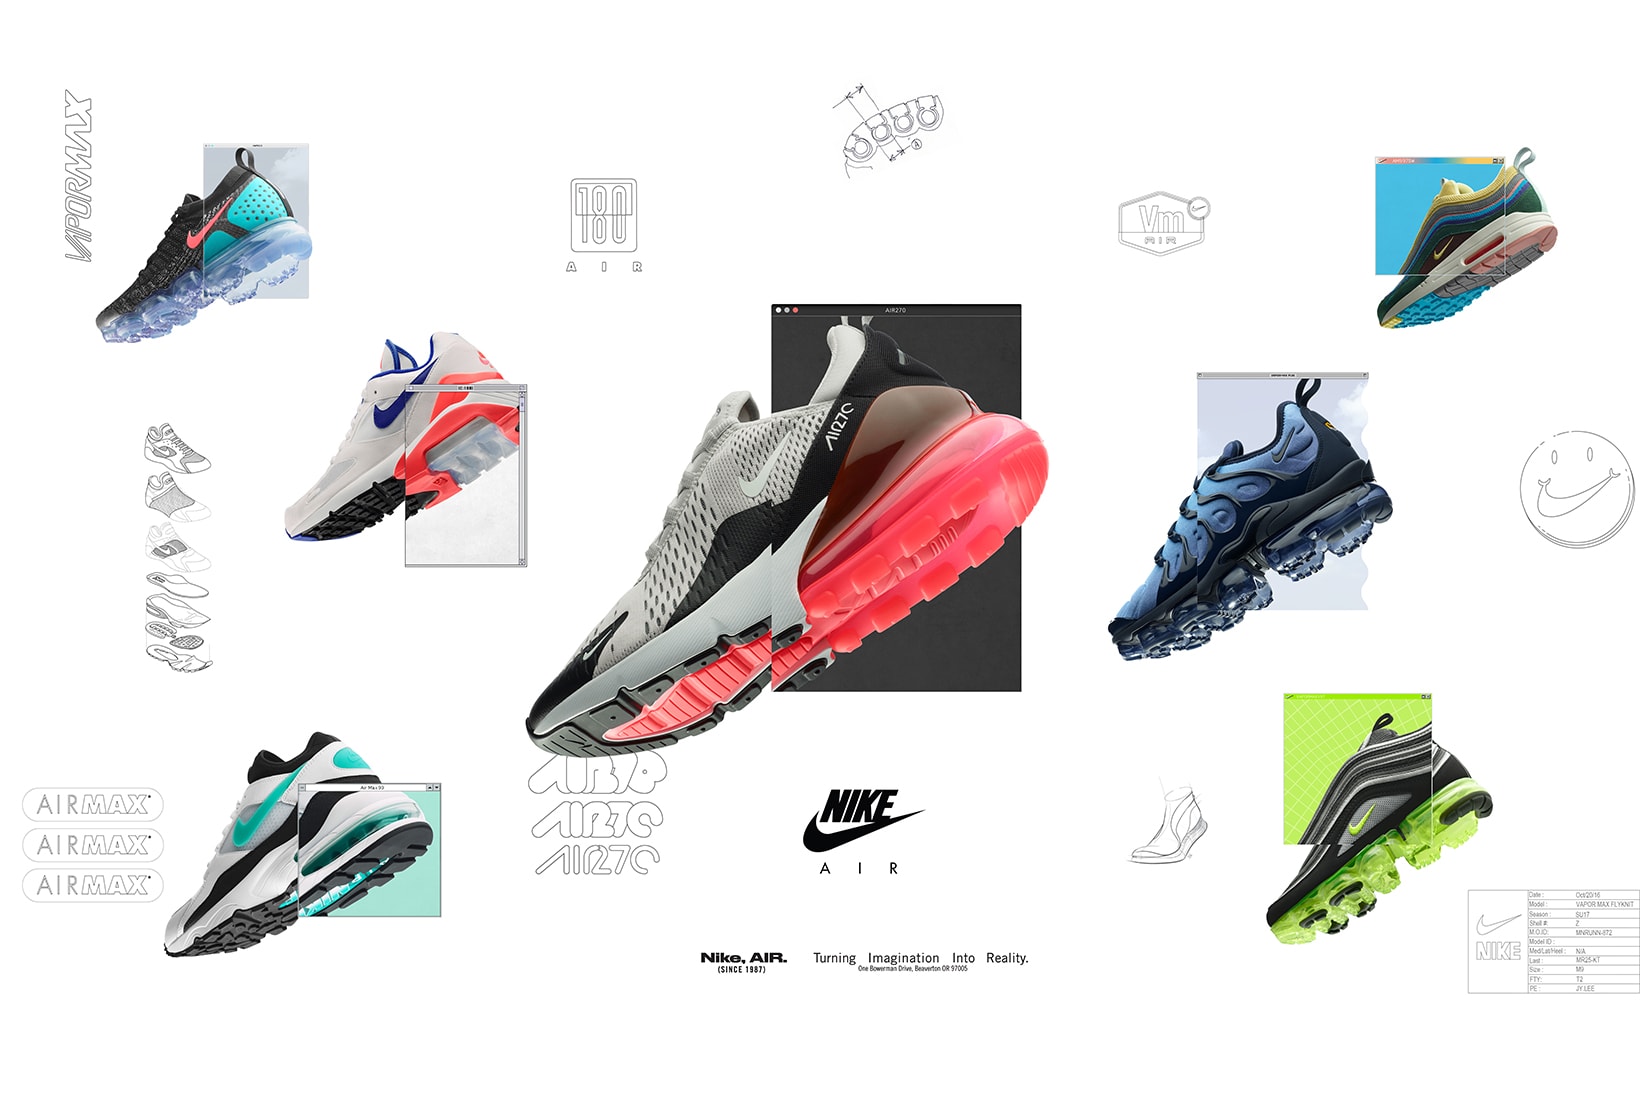 Nike Air Max Day 2018 lineup Nike Air Max 180 Nike Air Max 93 Nike Air Max Tn Nike Air Vapormax Nike Air Vapormax Plus Nike Air Max 270 Nike Air Vapormax 97 Nike Vapormax Flyknit 2 Nike Air Max 1 97 SW Vote Forward footwear SNKRS Release Date Info Drops January 25 February 2 March 26